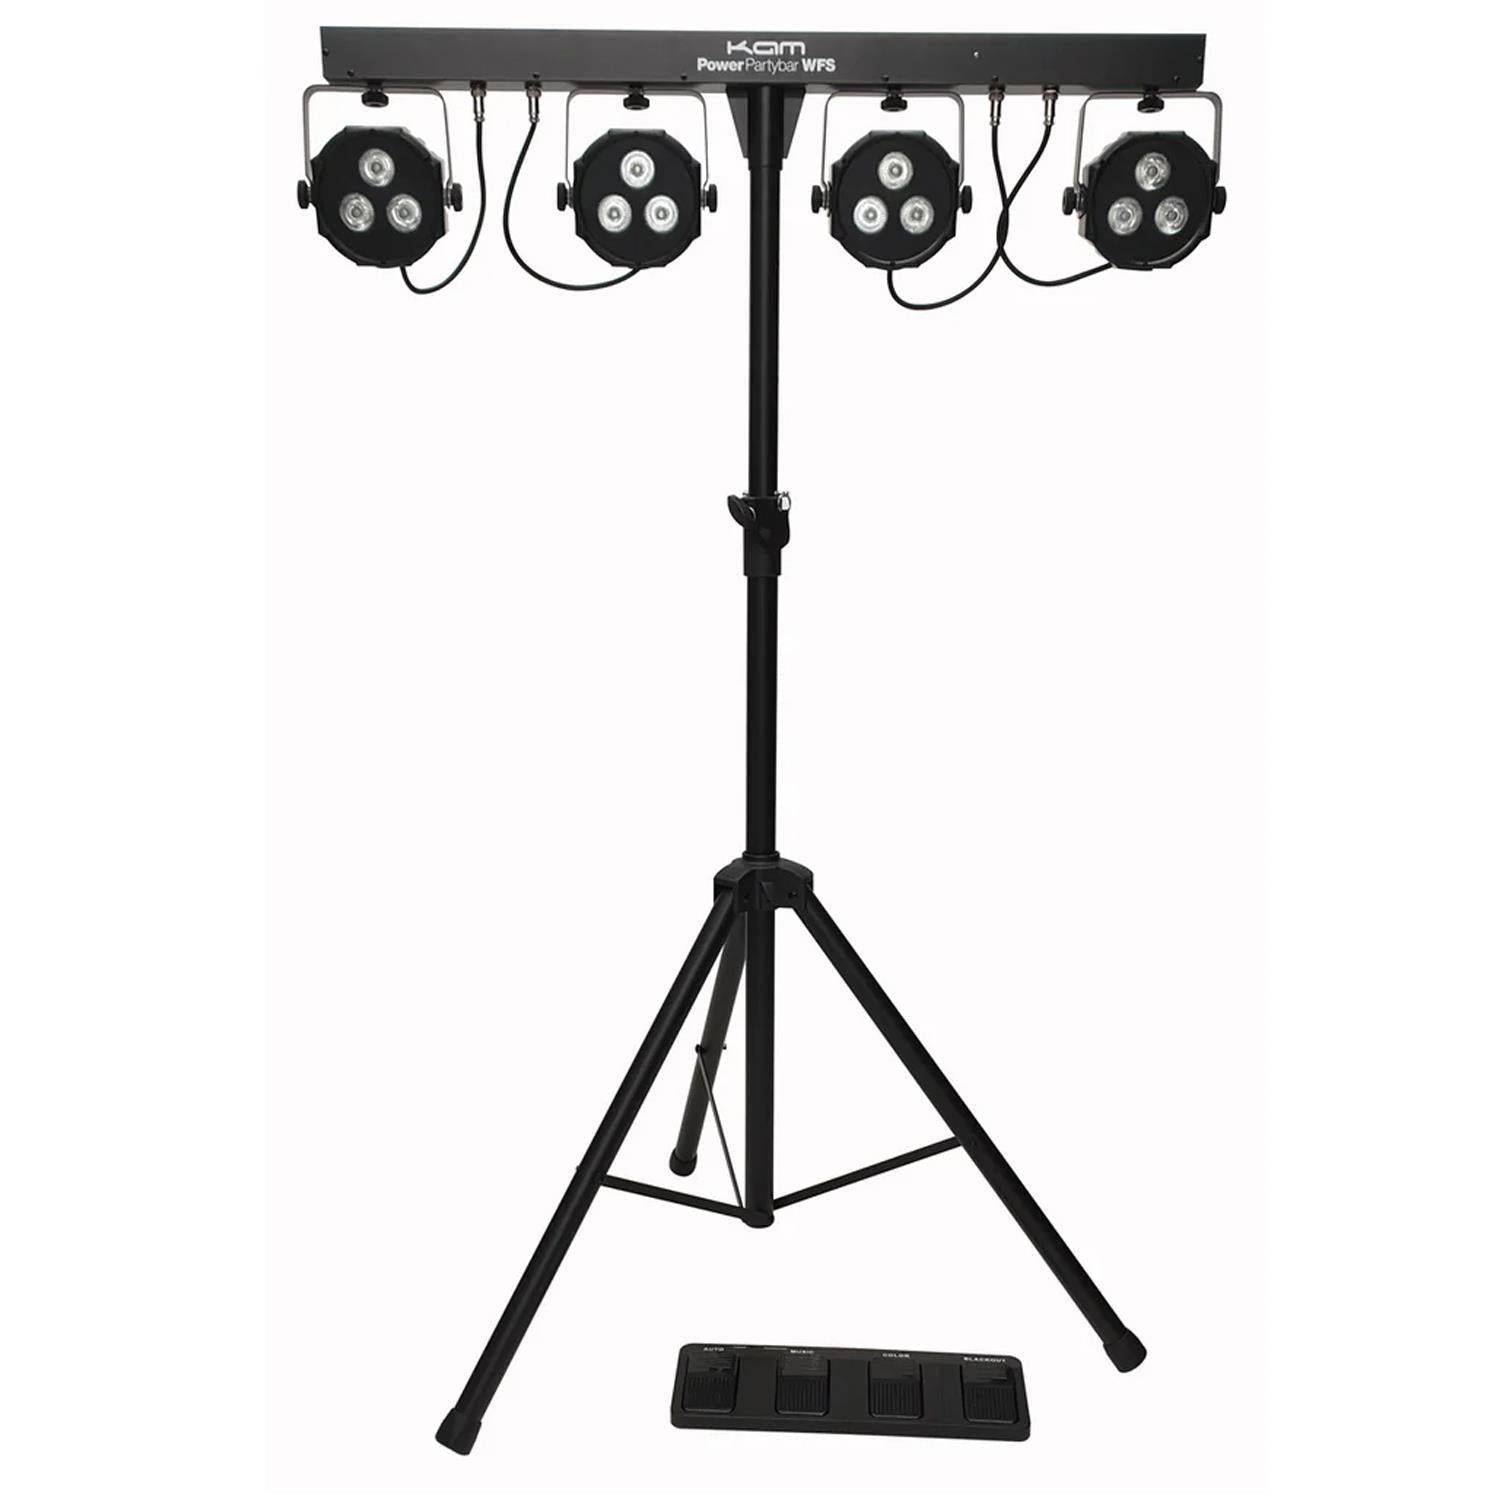 Kam Power Party Bar WFS Lights With Footswitch and Bag - DY Pro Audio